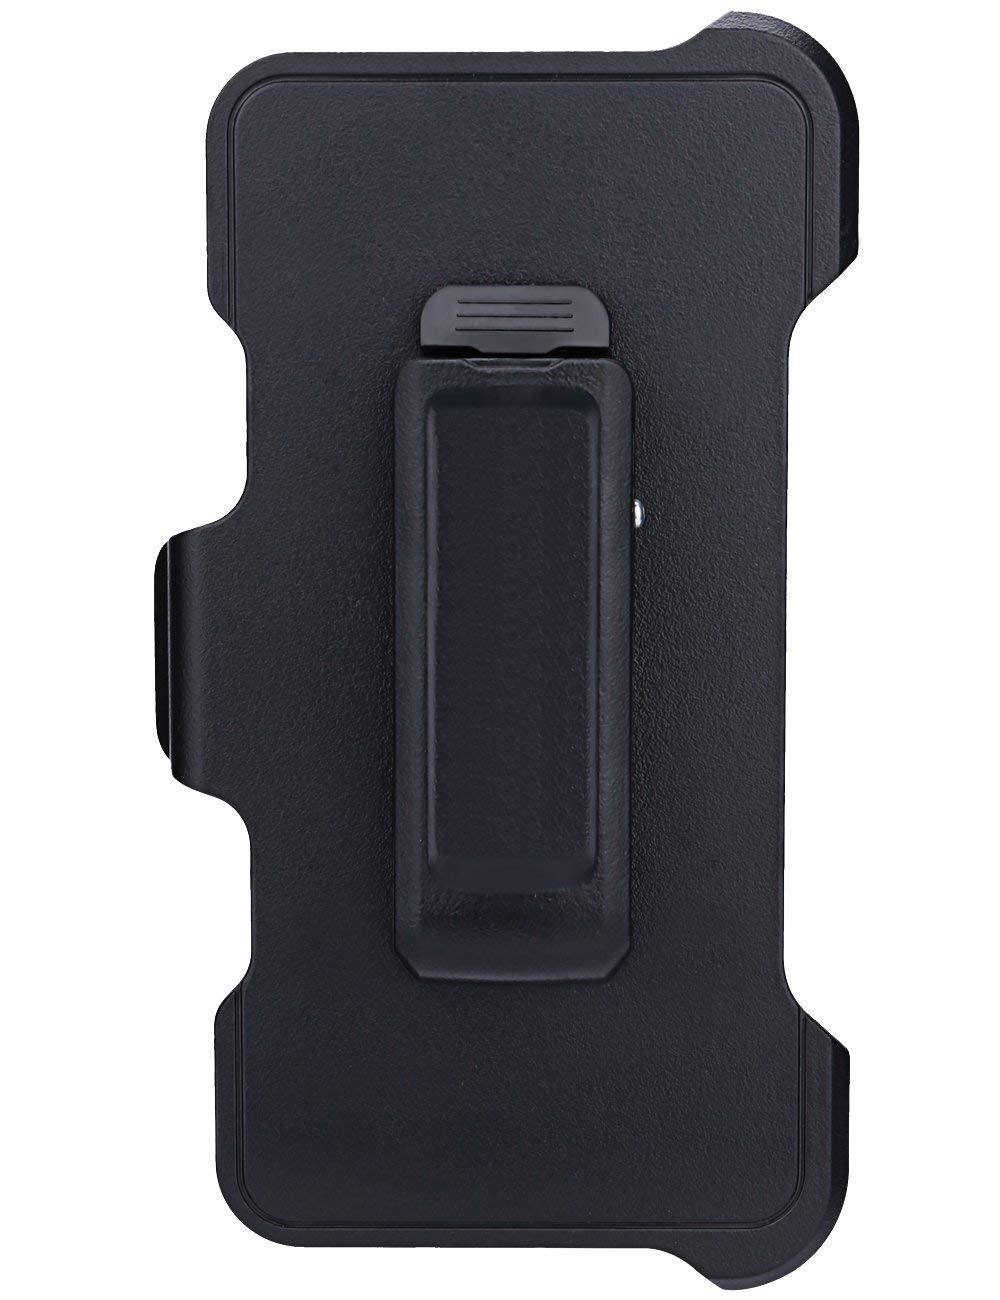 FOGEEK Holster Belt Clip & Kickstand for FOGEEK iPhone 6/6s Defender Case - Black Rotating Swivel Replacement Holster Belt Clip Case with Kickstand - (Not Intended for Stand-Alone Use) ASIN:B06XCT1WCP